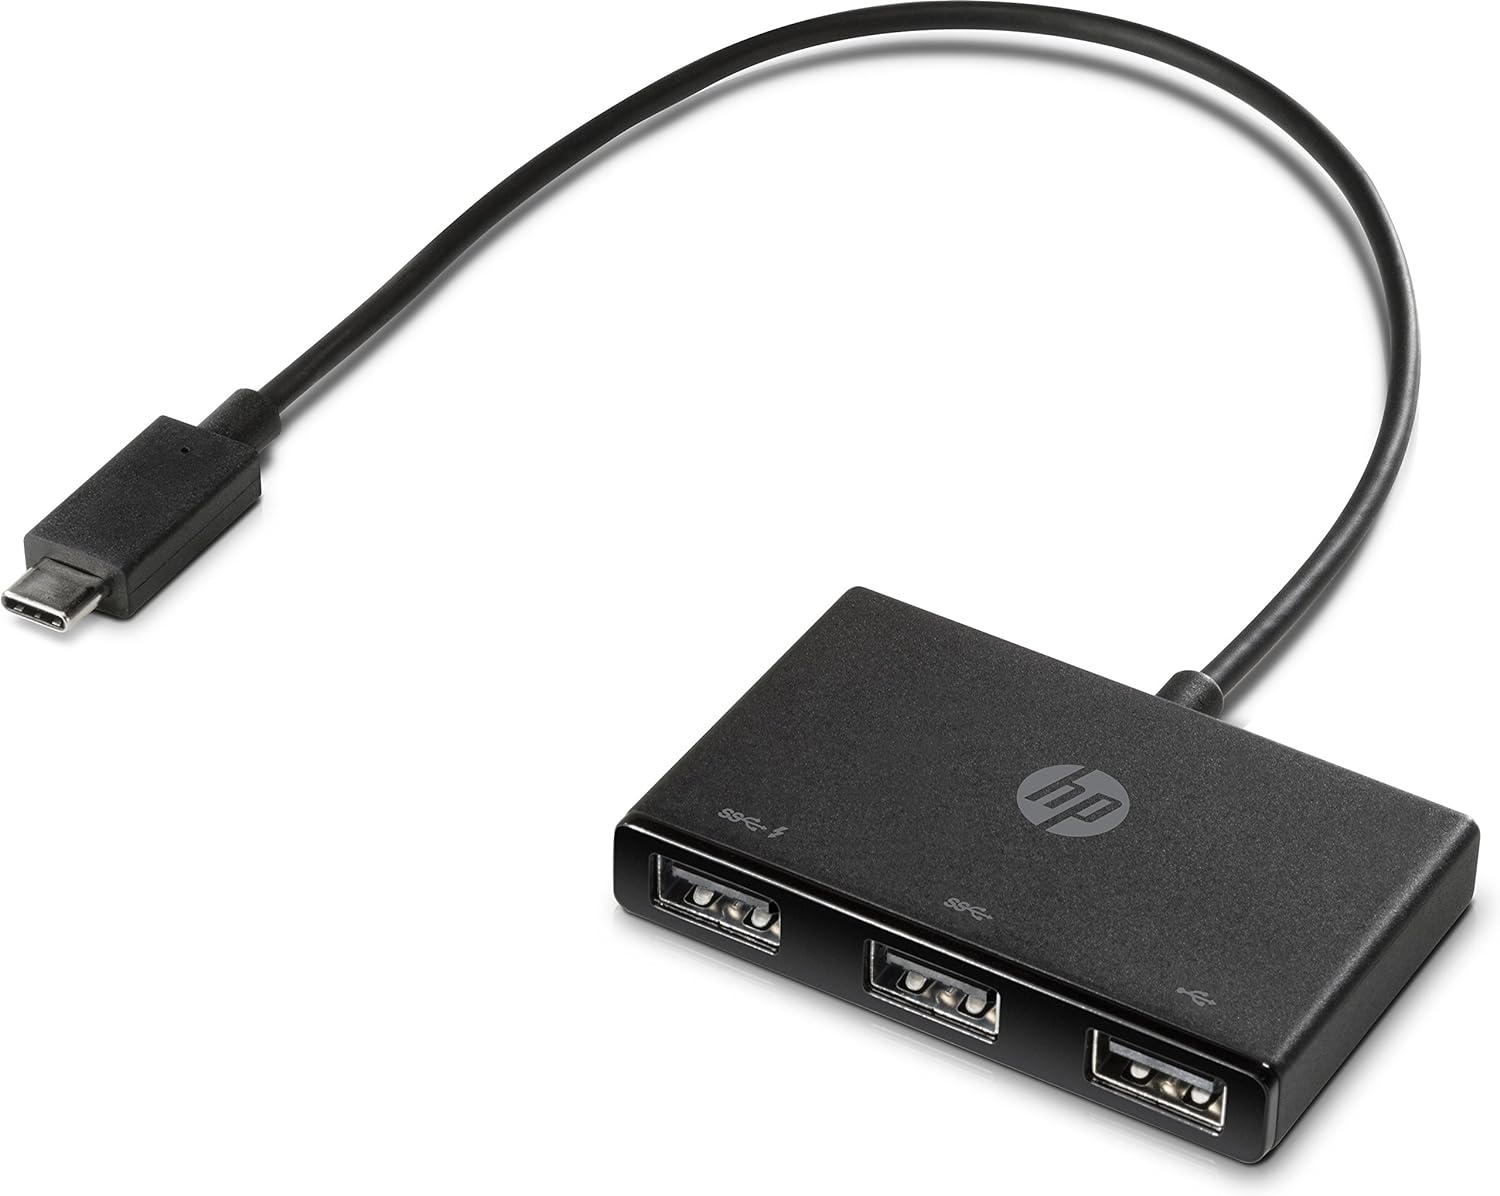 HP USB-C to USB-A Hub - No software required, convenient for trusted accessories on-the-go. 0190780929506